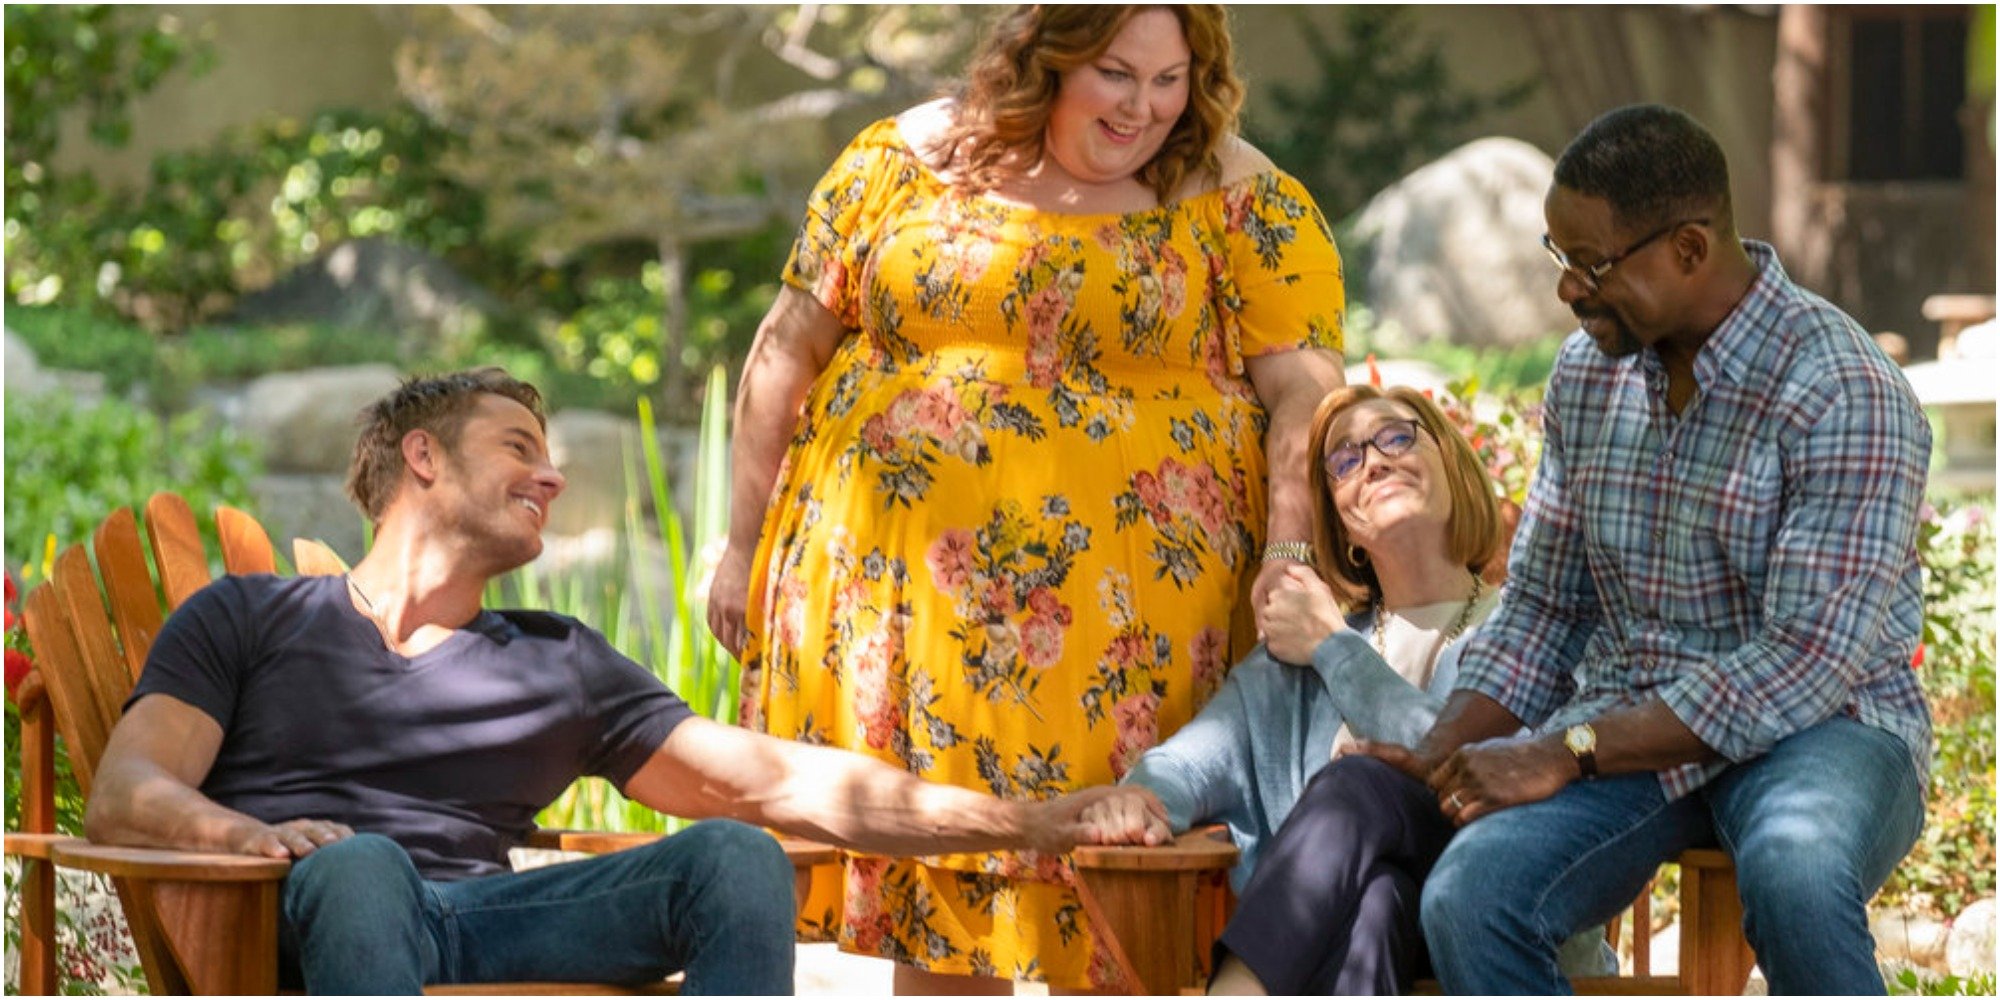 justin hartley chrissy metz mandy moore sterling k. brown pose for a this is us set photo.